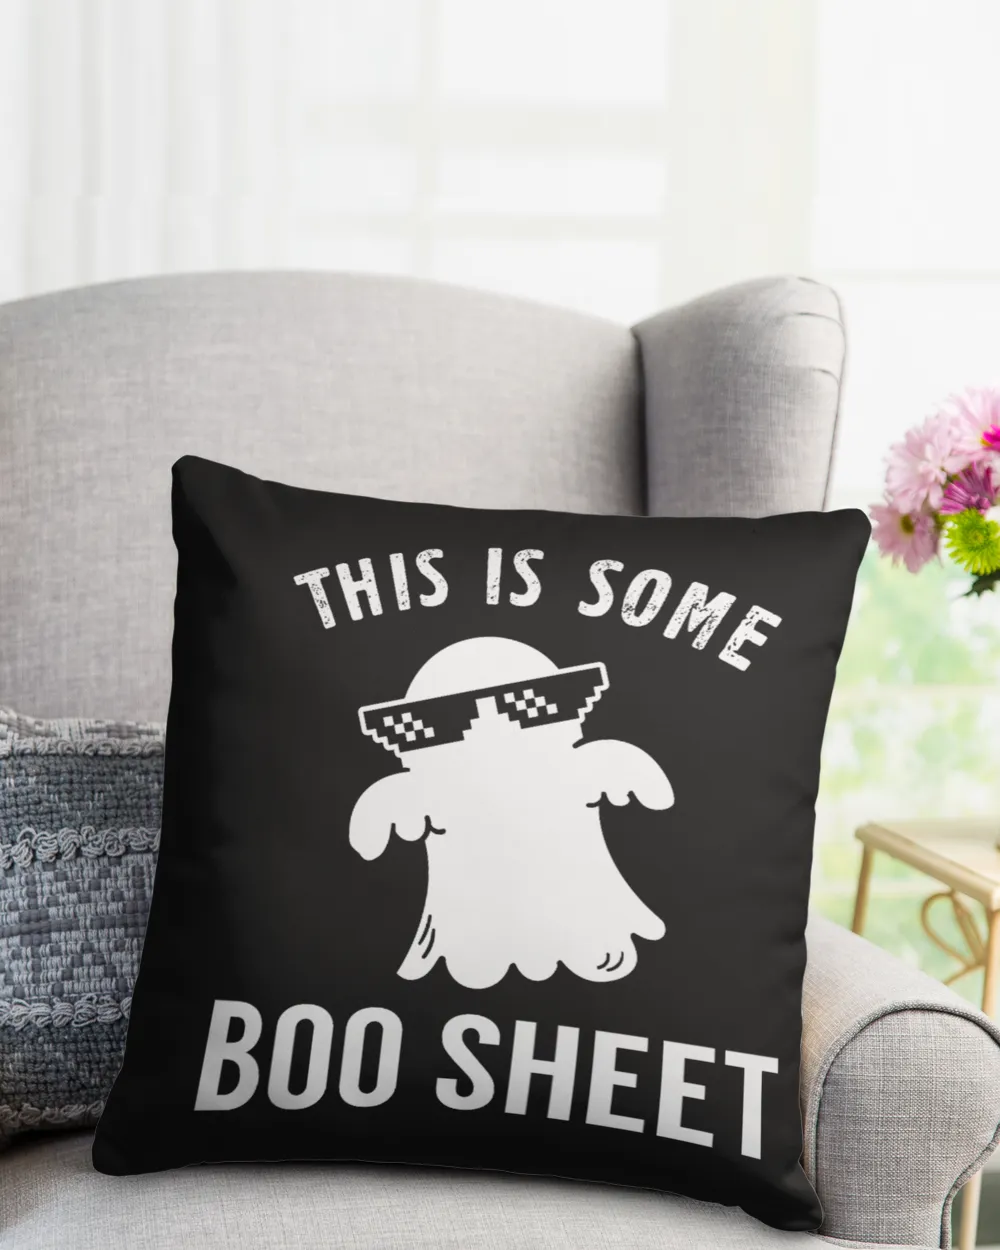 Funny Halloween Themed This Is Some Boo Sheet T-Shirts, Hoodies, Mugs & More!